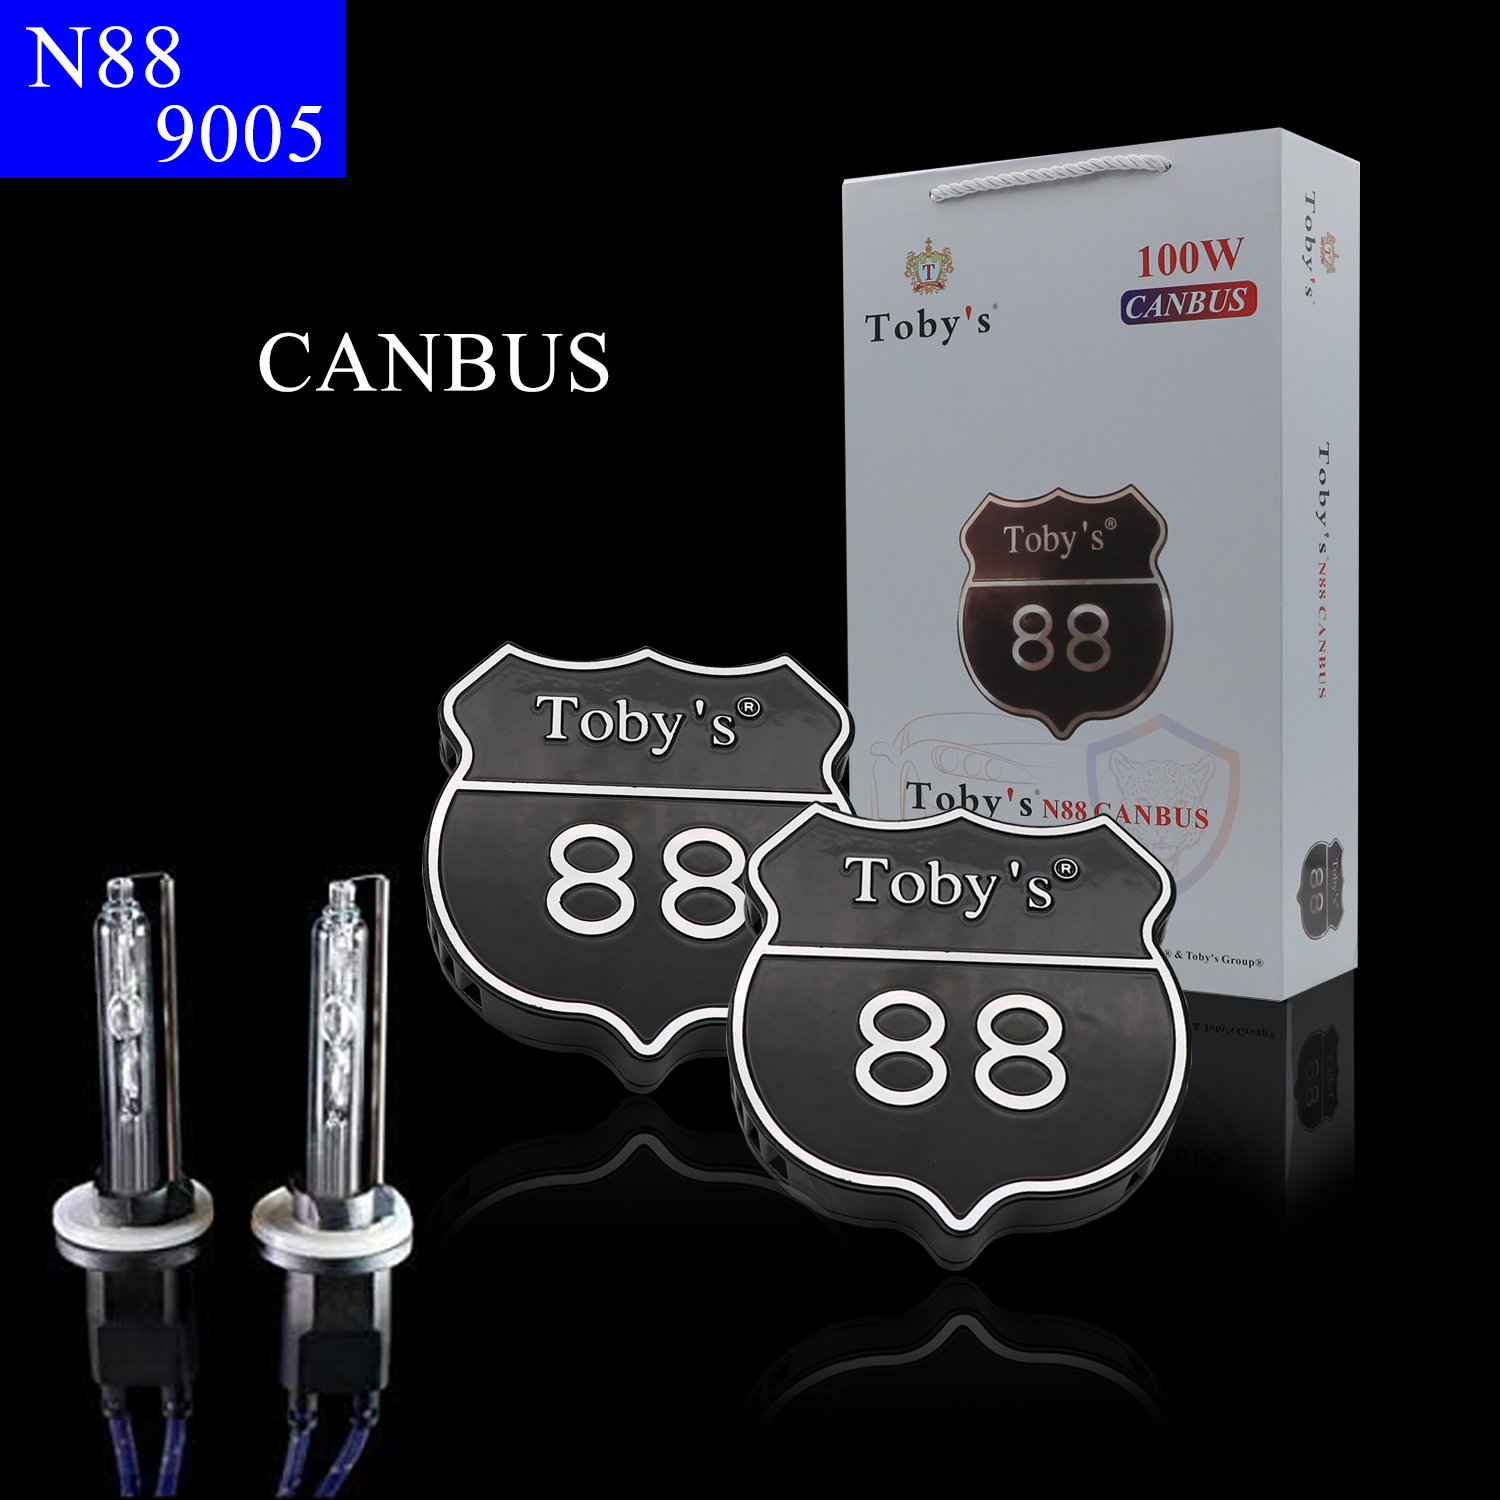 9005 HID Xenon Canbus KIT 100W Best Replacement of Halogen